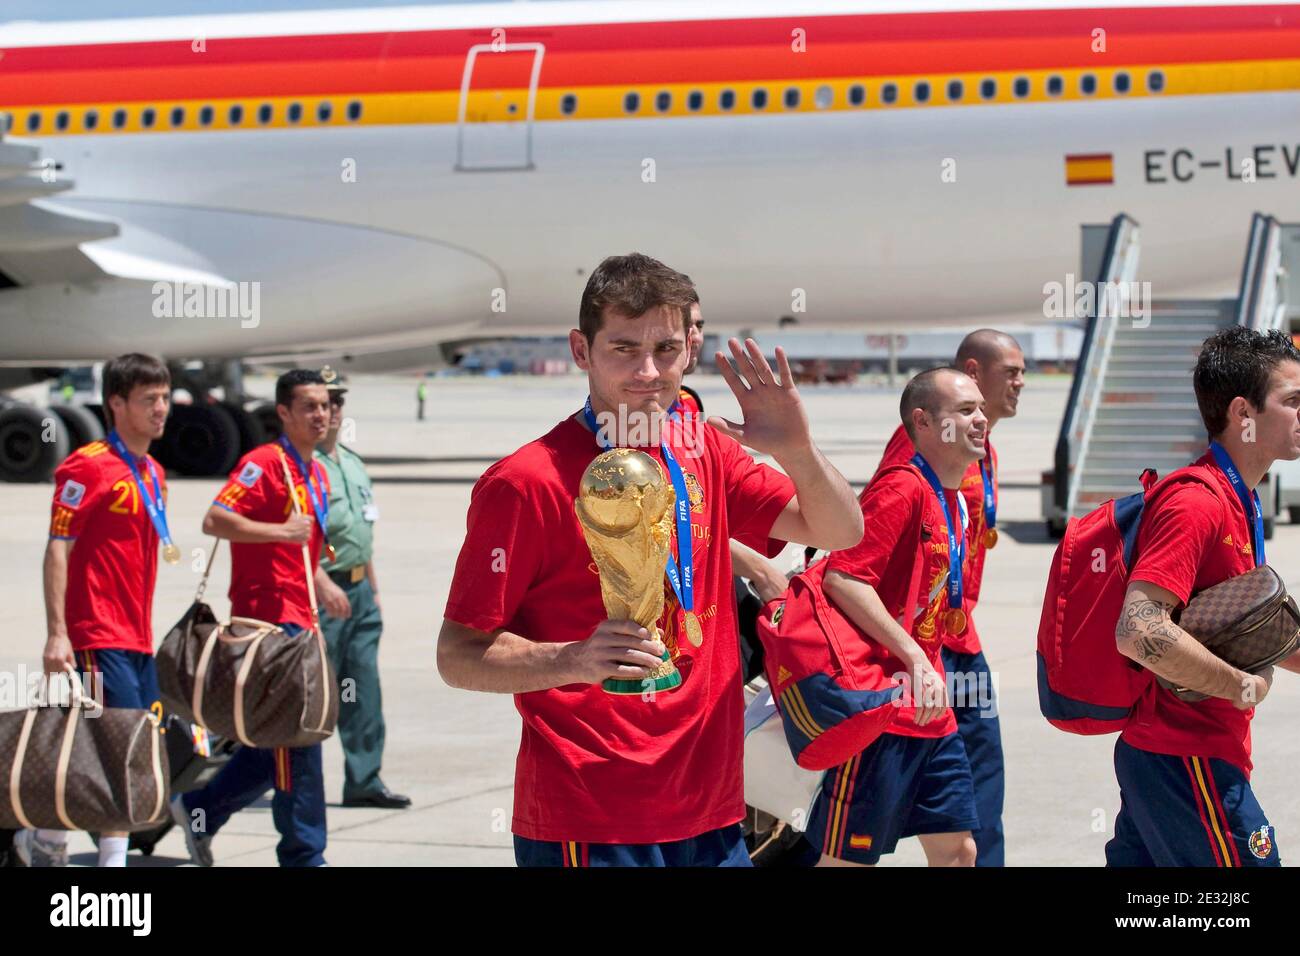 Spain's captain Iker Casillas raises the World Cup trophy as he leaves the aircraft that brought the Spanish team back from South Africa, at Madrid's Barajas airport, in Spain, on Monday, July 12, 2010. Spain won the World Cup after defeating the Netherlands 1-0 on Sunday. Photo by Almagro/Cameleon/ABACAPRESS.COM Stock Photo